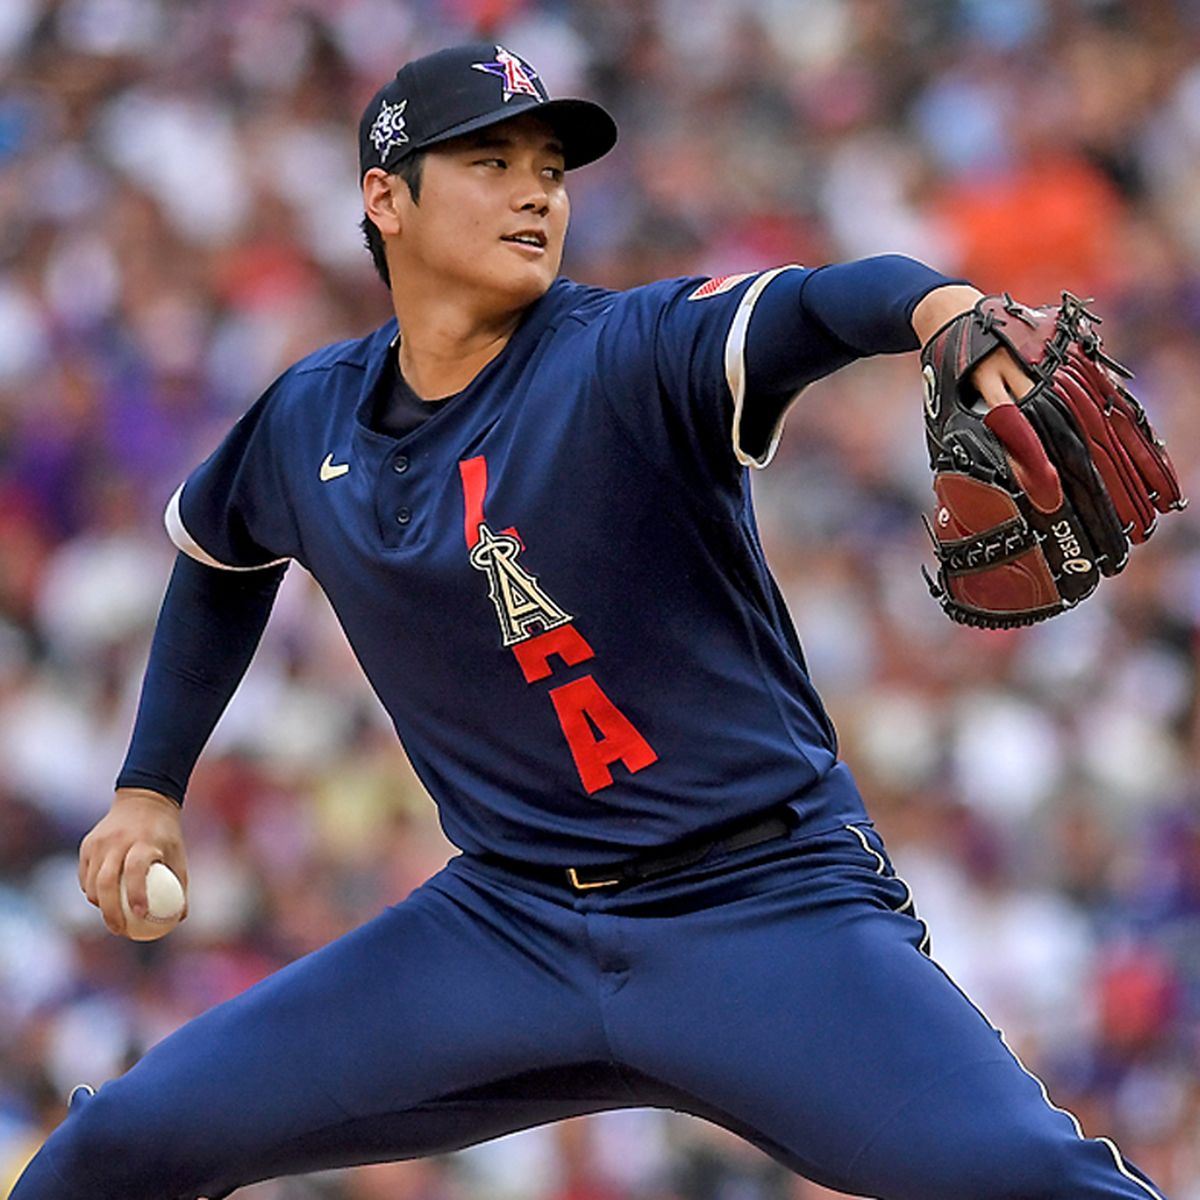 Shohei Ohtani #17 Nike MLB Los Angeles Angels City Connect Player